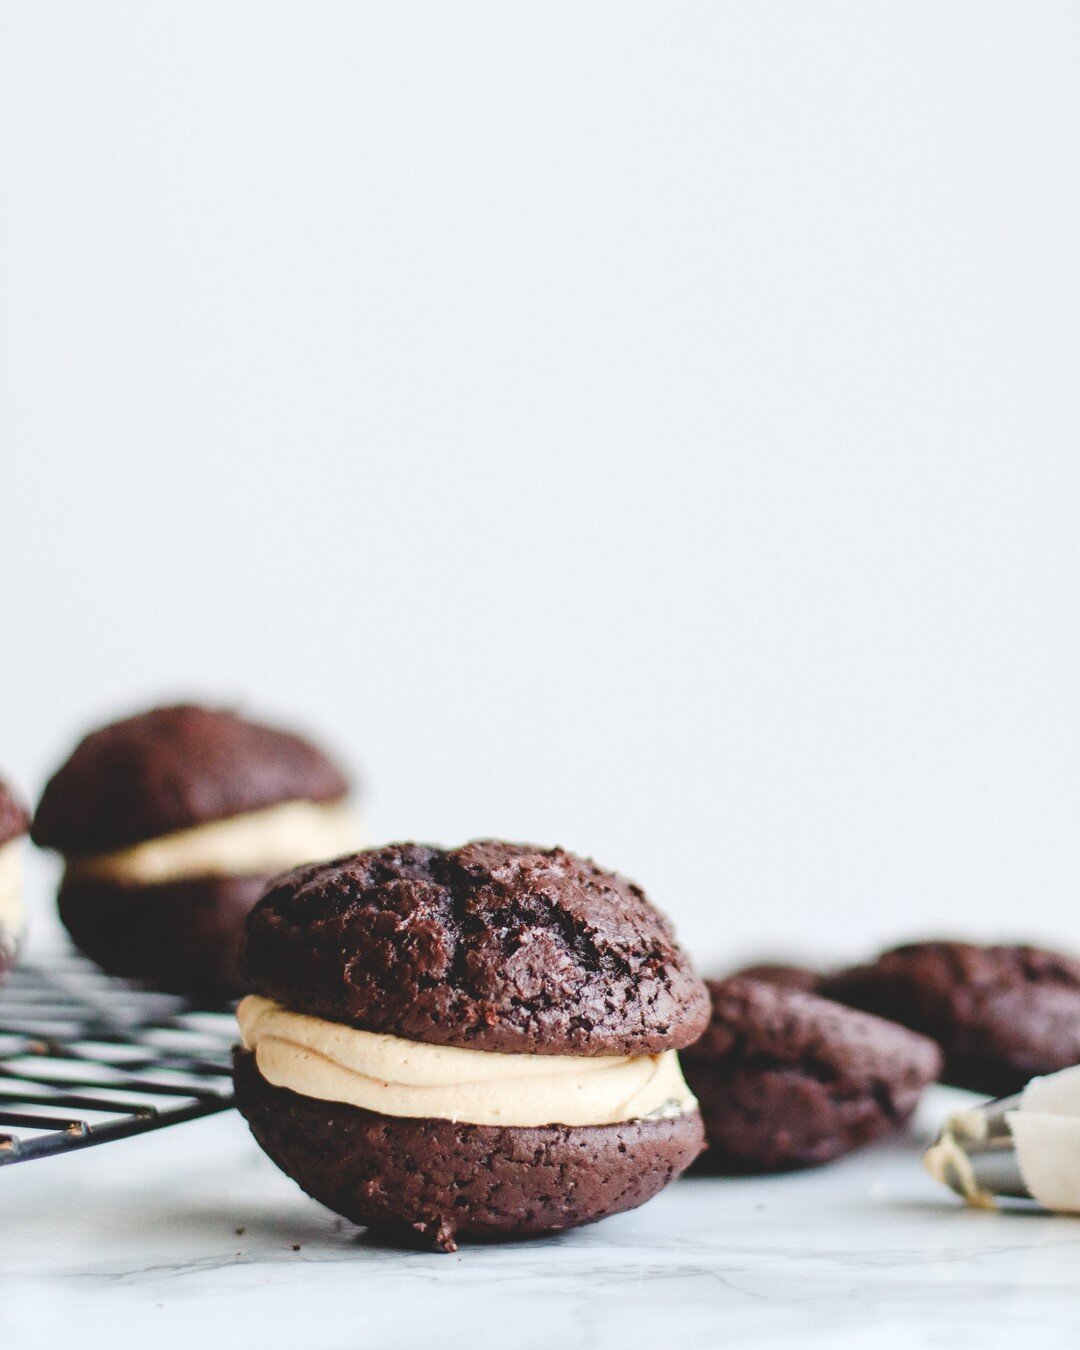 Chocolate peanut butter whoopie pies. They&rsquo;re like the cheeseburger of cookies and I love it. ⠀⠀⠀⠀⠀⠀⠀⠀⠀
⠀⠀⠀⠀⠀⠀⠀⠀⠀
Taste testing and perfecting upcoming projects. We cannot wait!